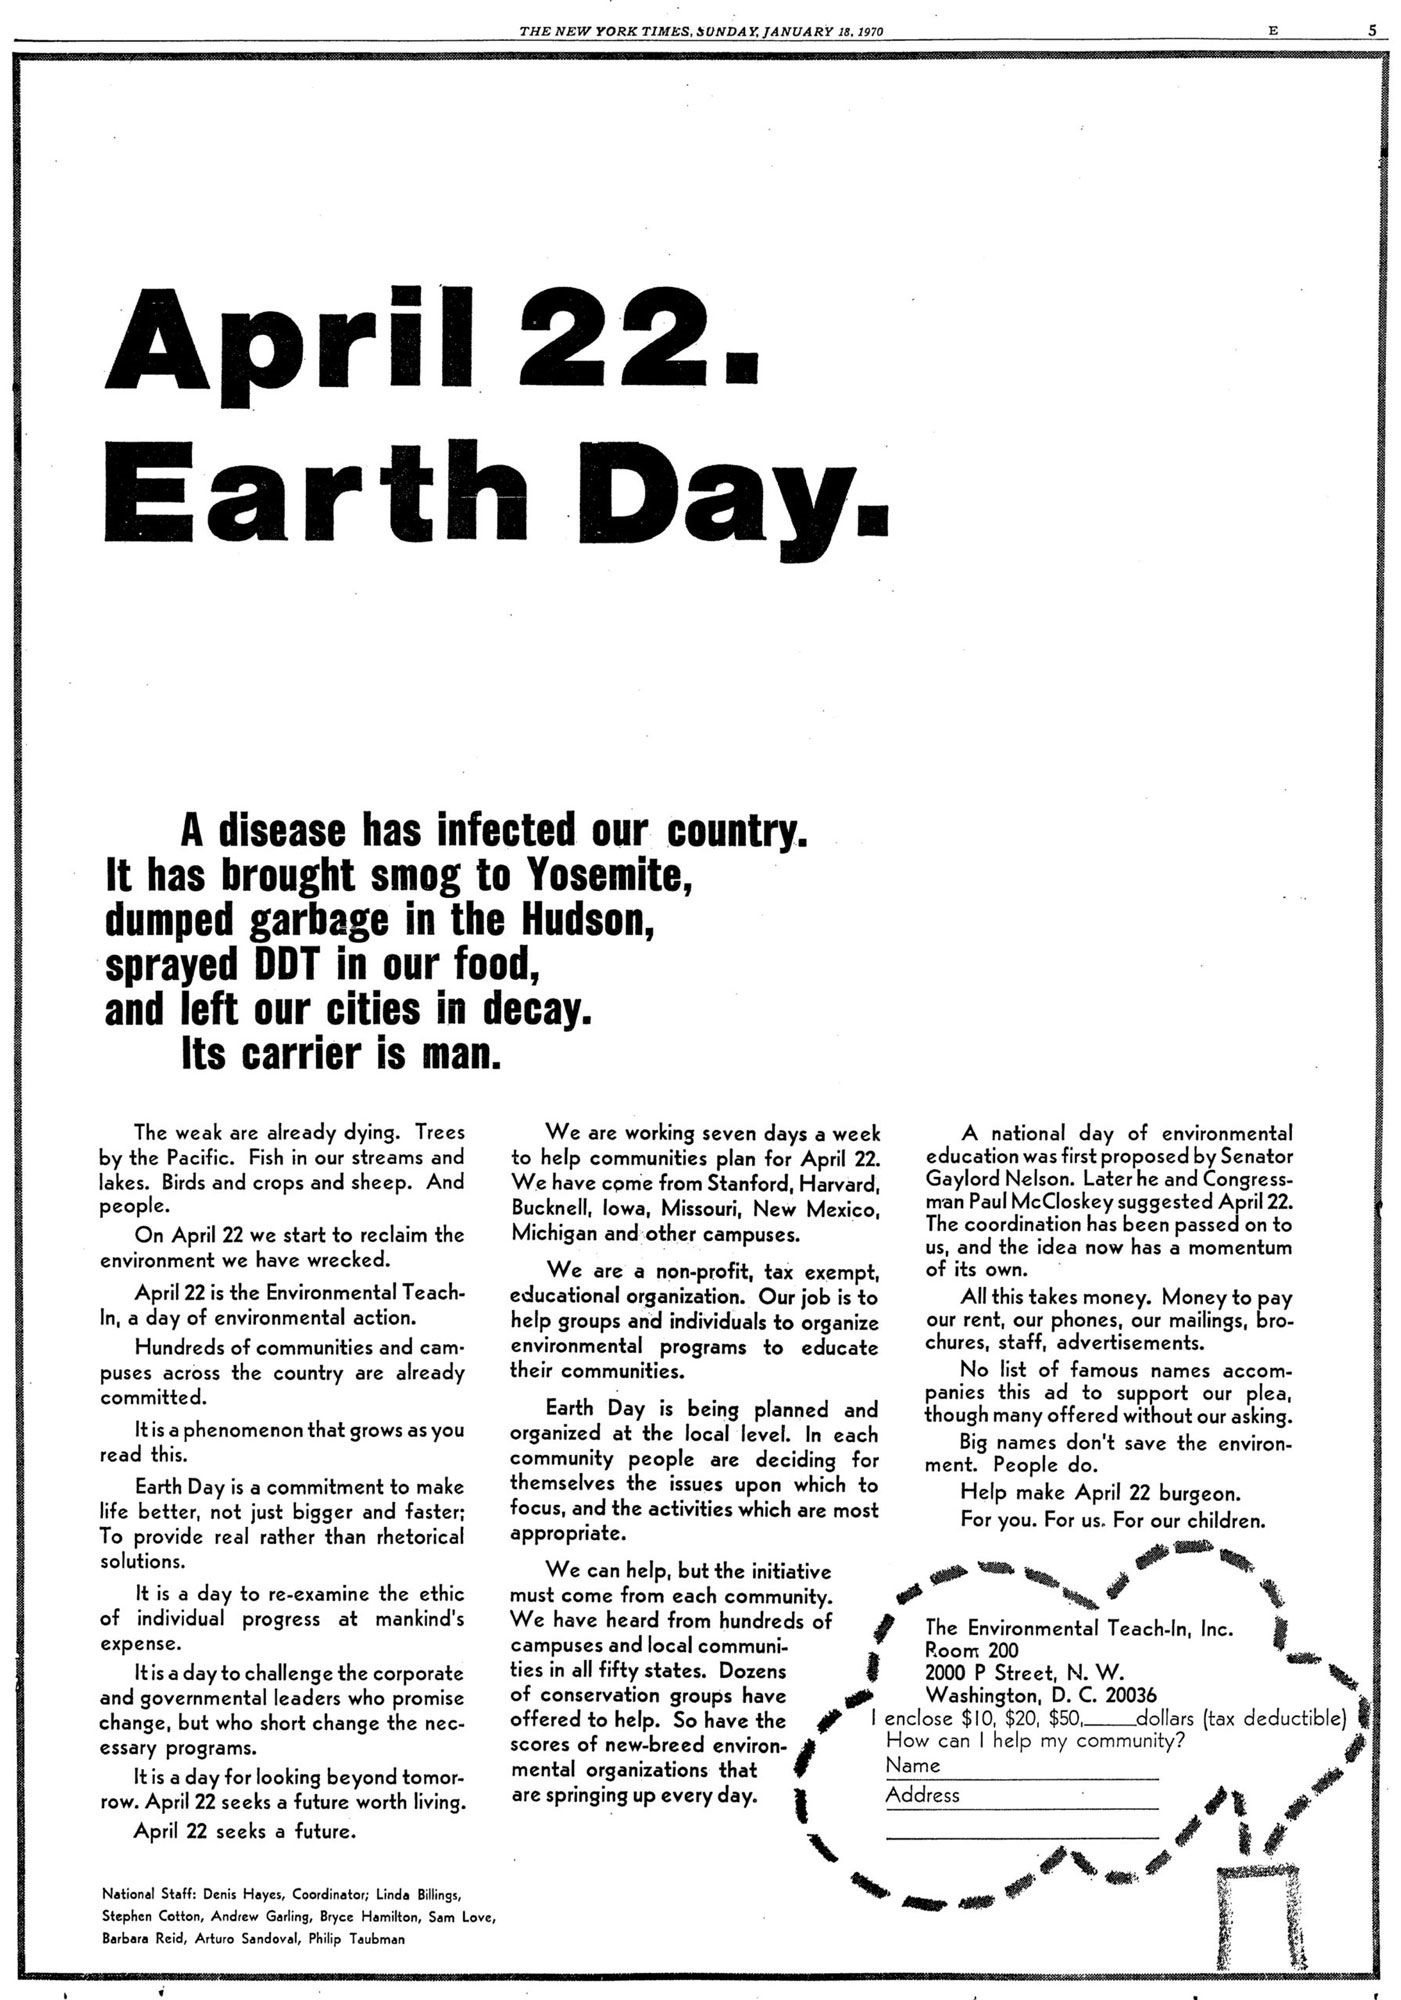 NPO aims to make history again this 50th anniversary of Earth Day